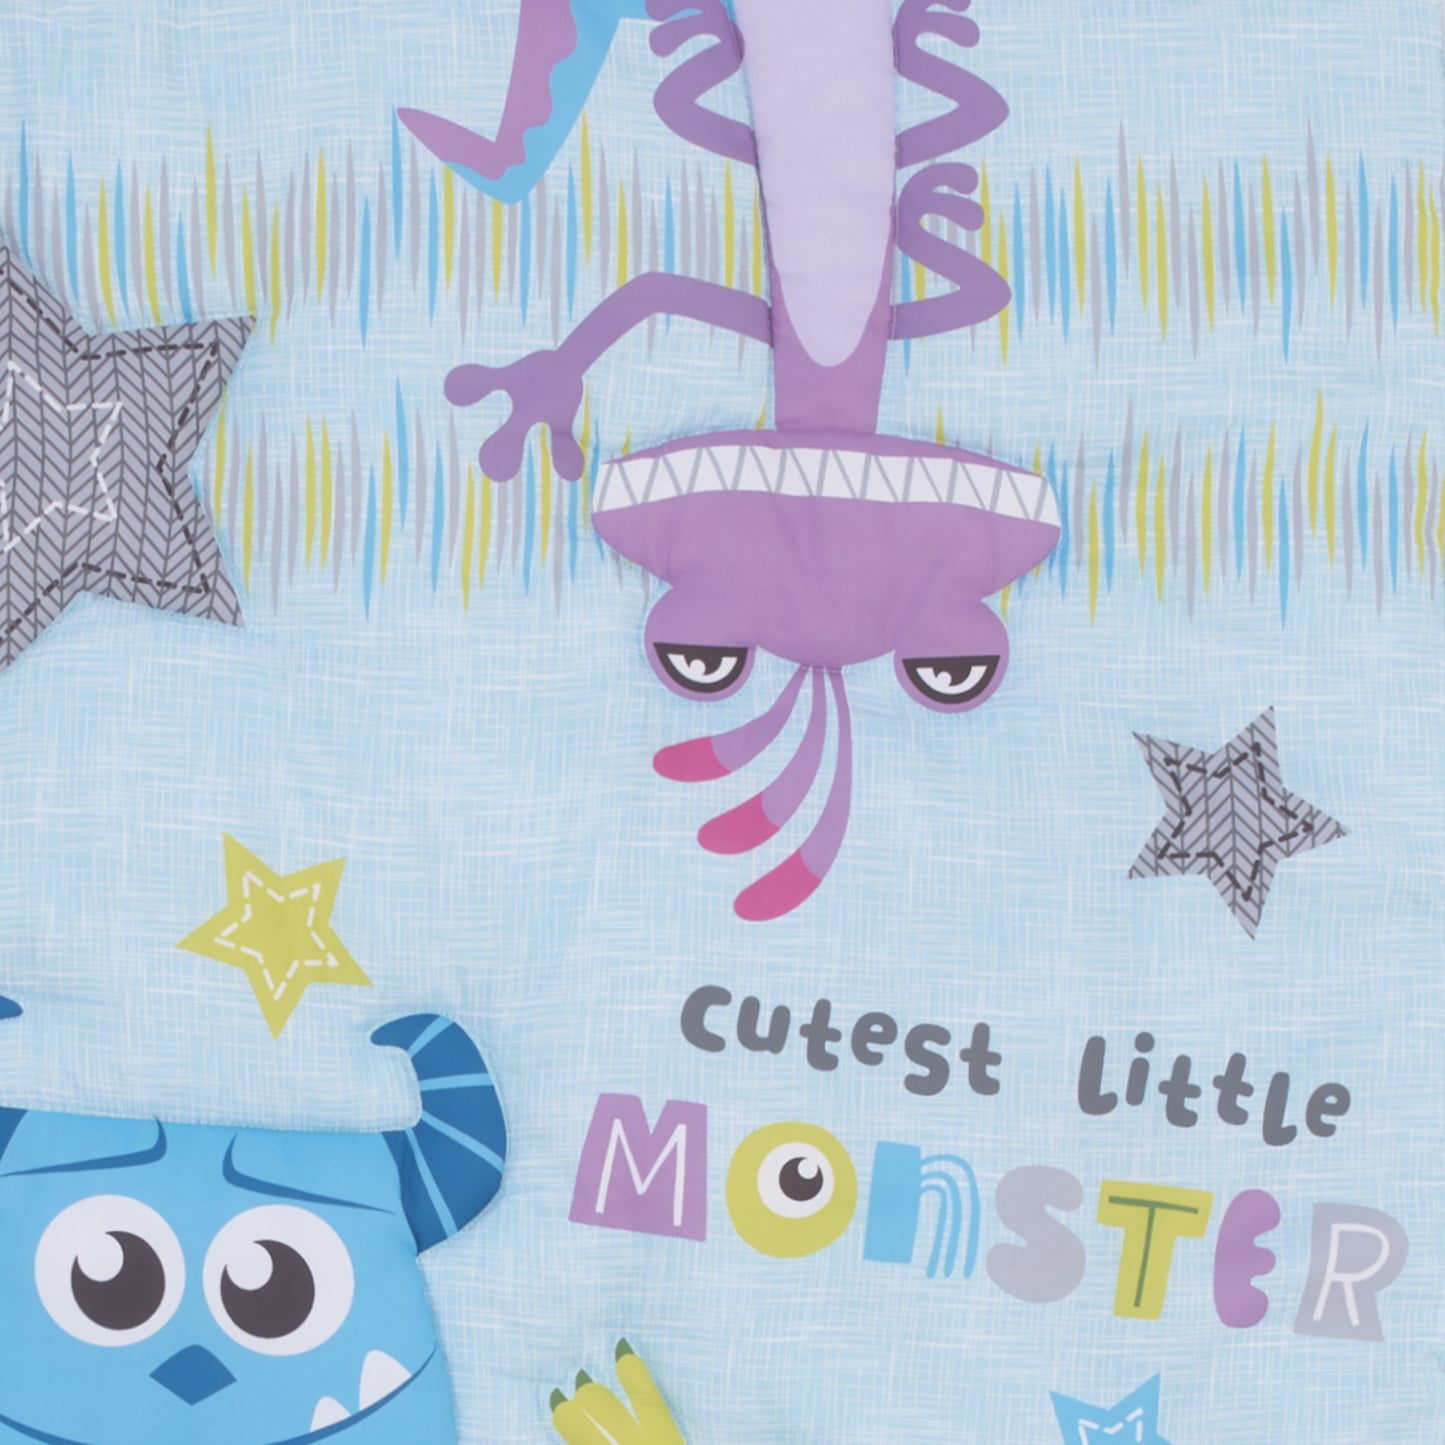 Disney Monsters, Inc. Cutest Little Monster Turquoise, Green, Purple, and Gray, Sully, Mike, and Randall 3 Piece Nursery Crib Bedding Set - Comforter, Fitted Crib Sheet, and Crib Skirt